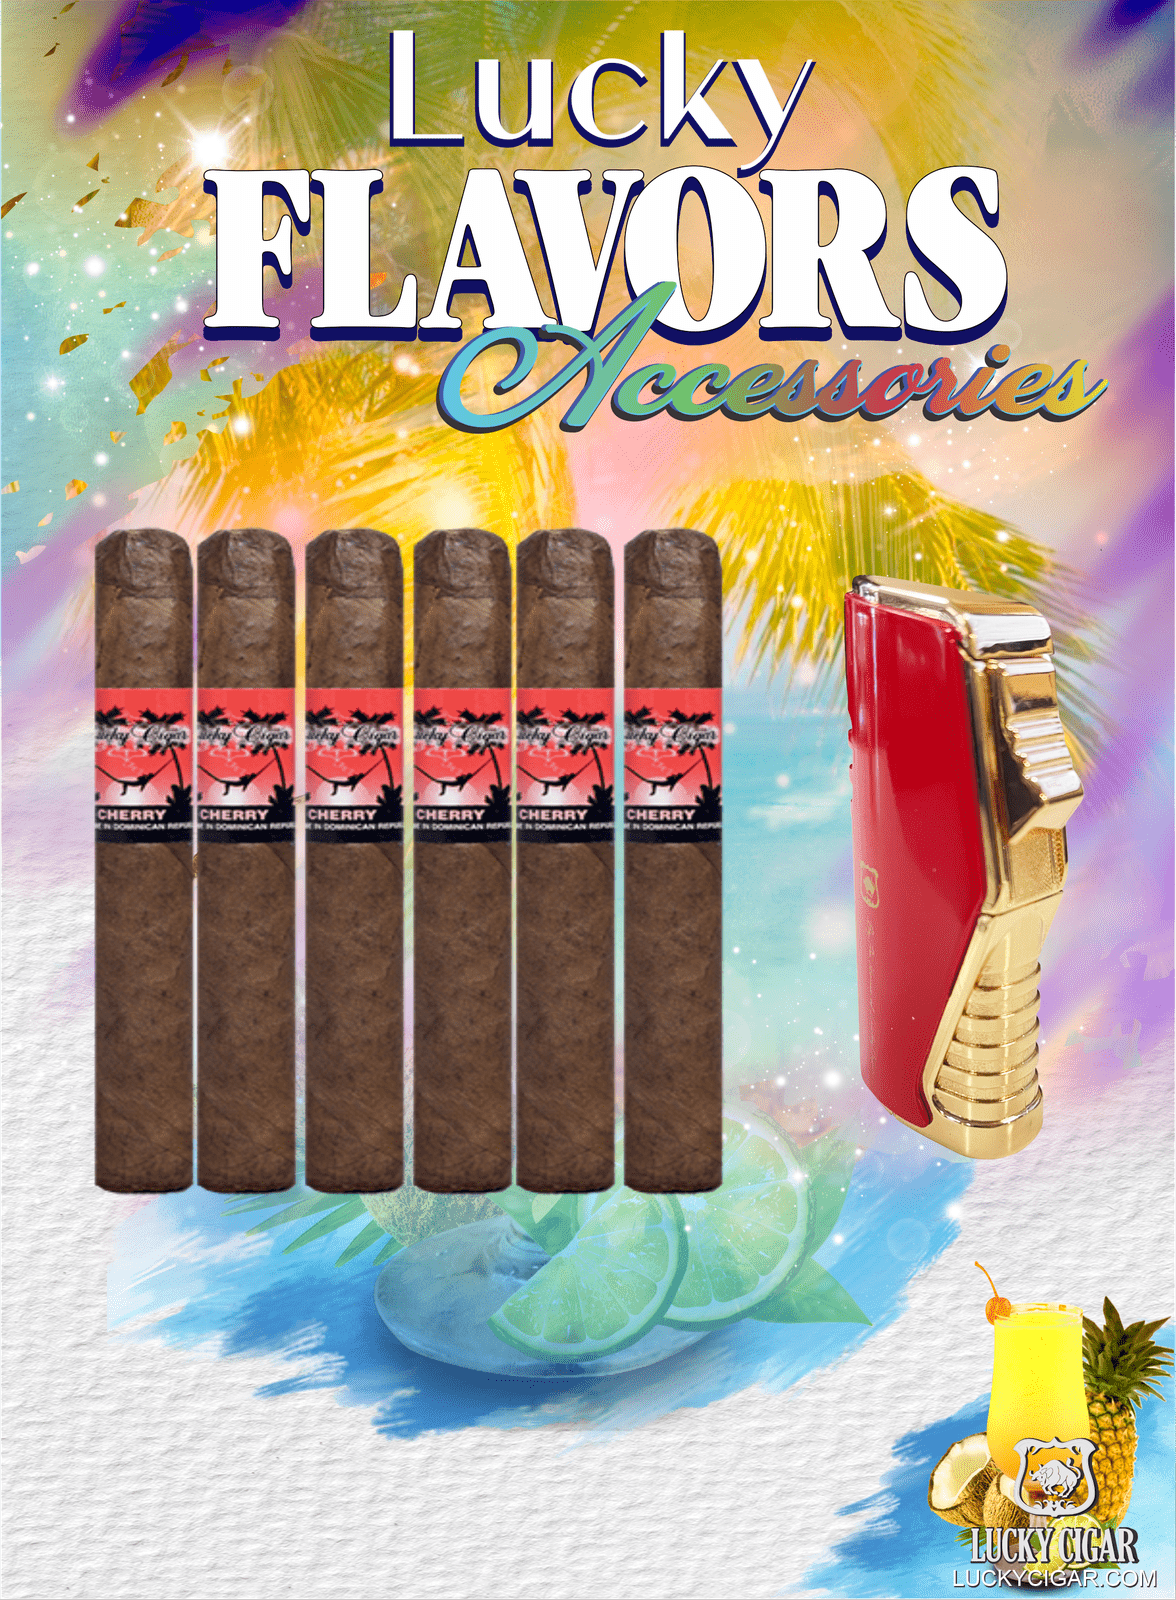 Flavored Cigars: Lucky Flavors 6 Cherry Cigar Set with Red Torch Lighter